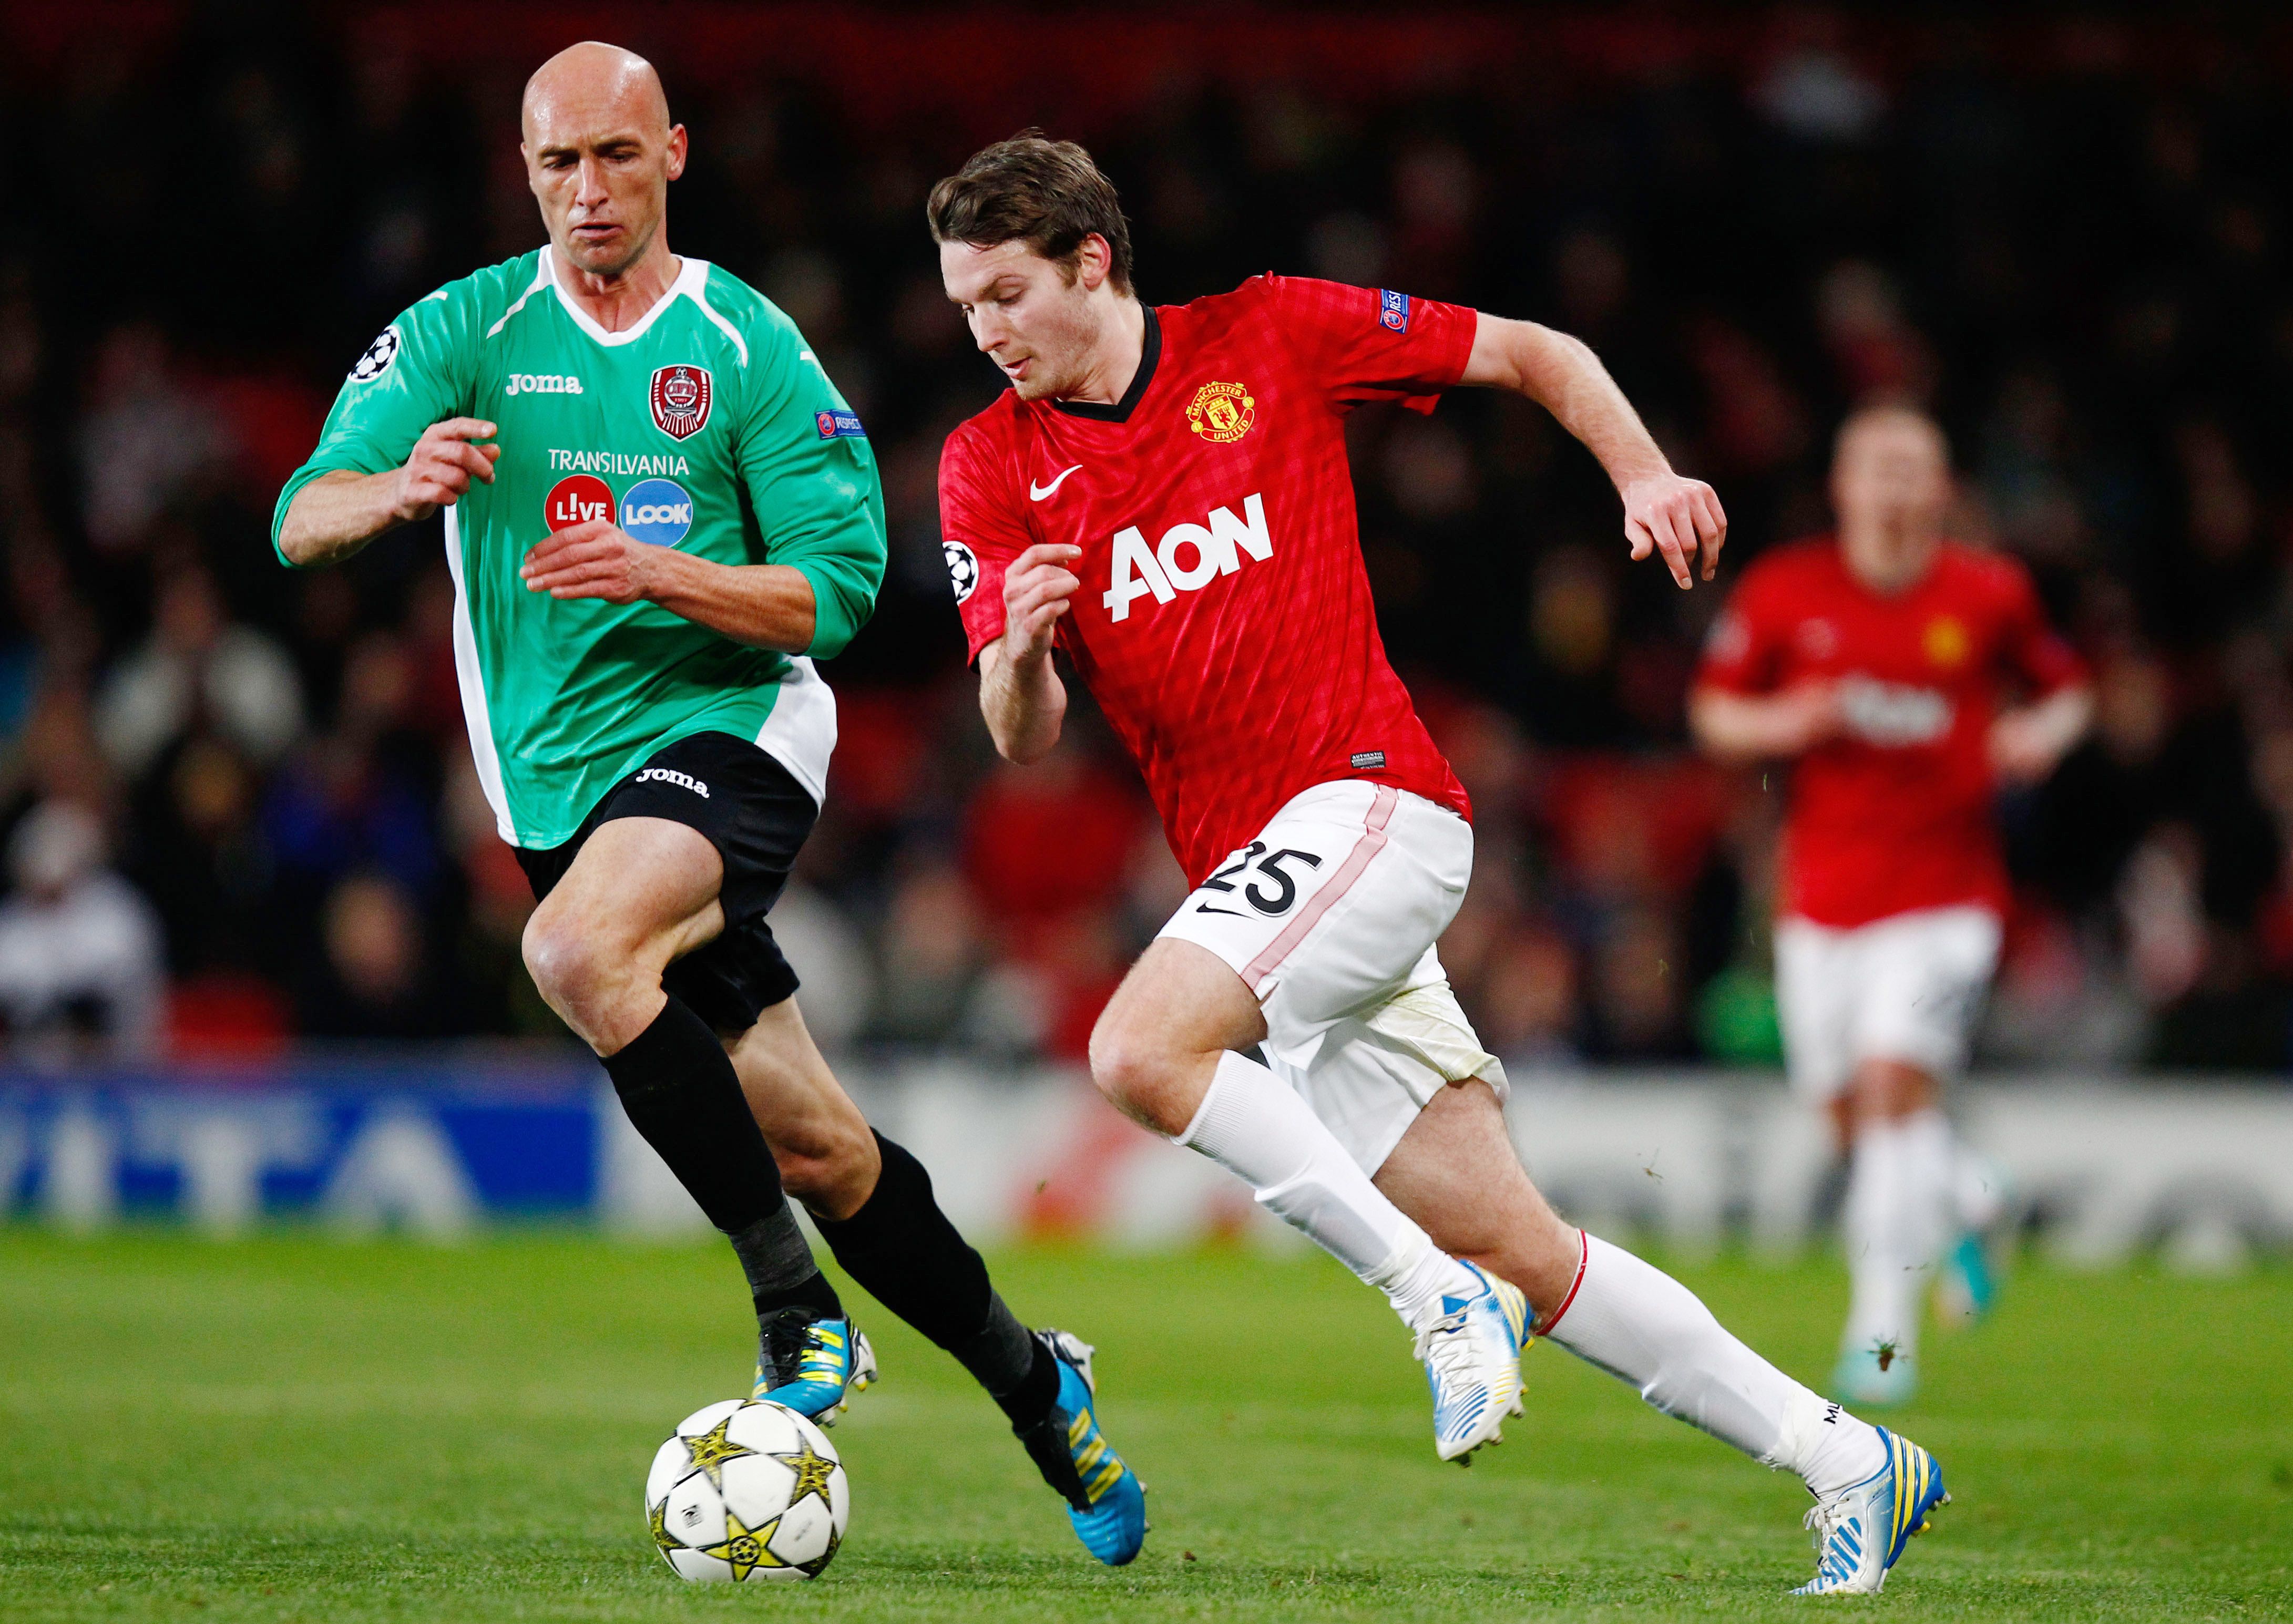 Manchester United's Nick Powell and CFR Cluj's Gabriel Muresan.